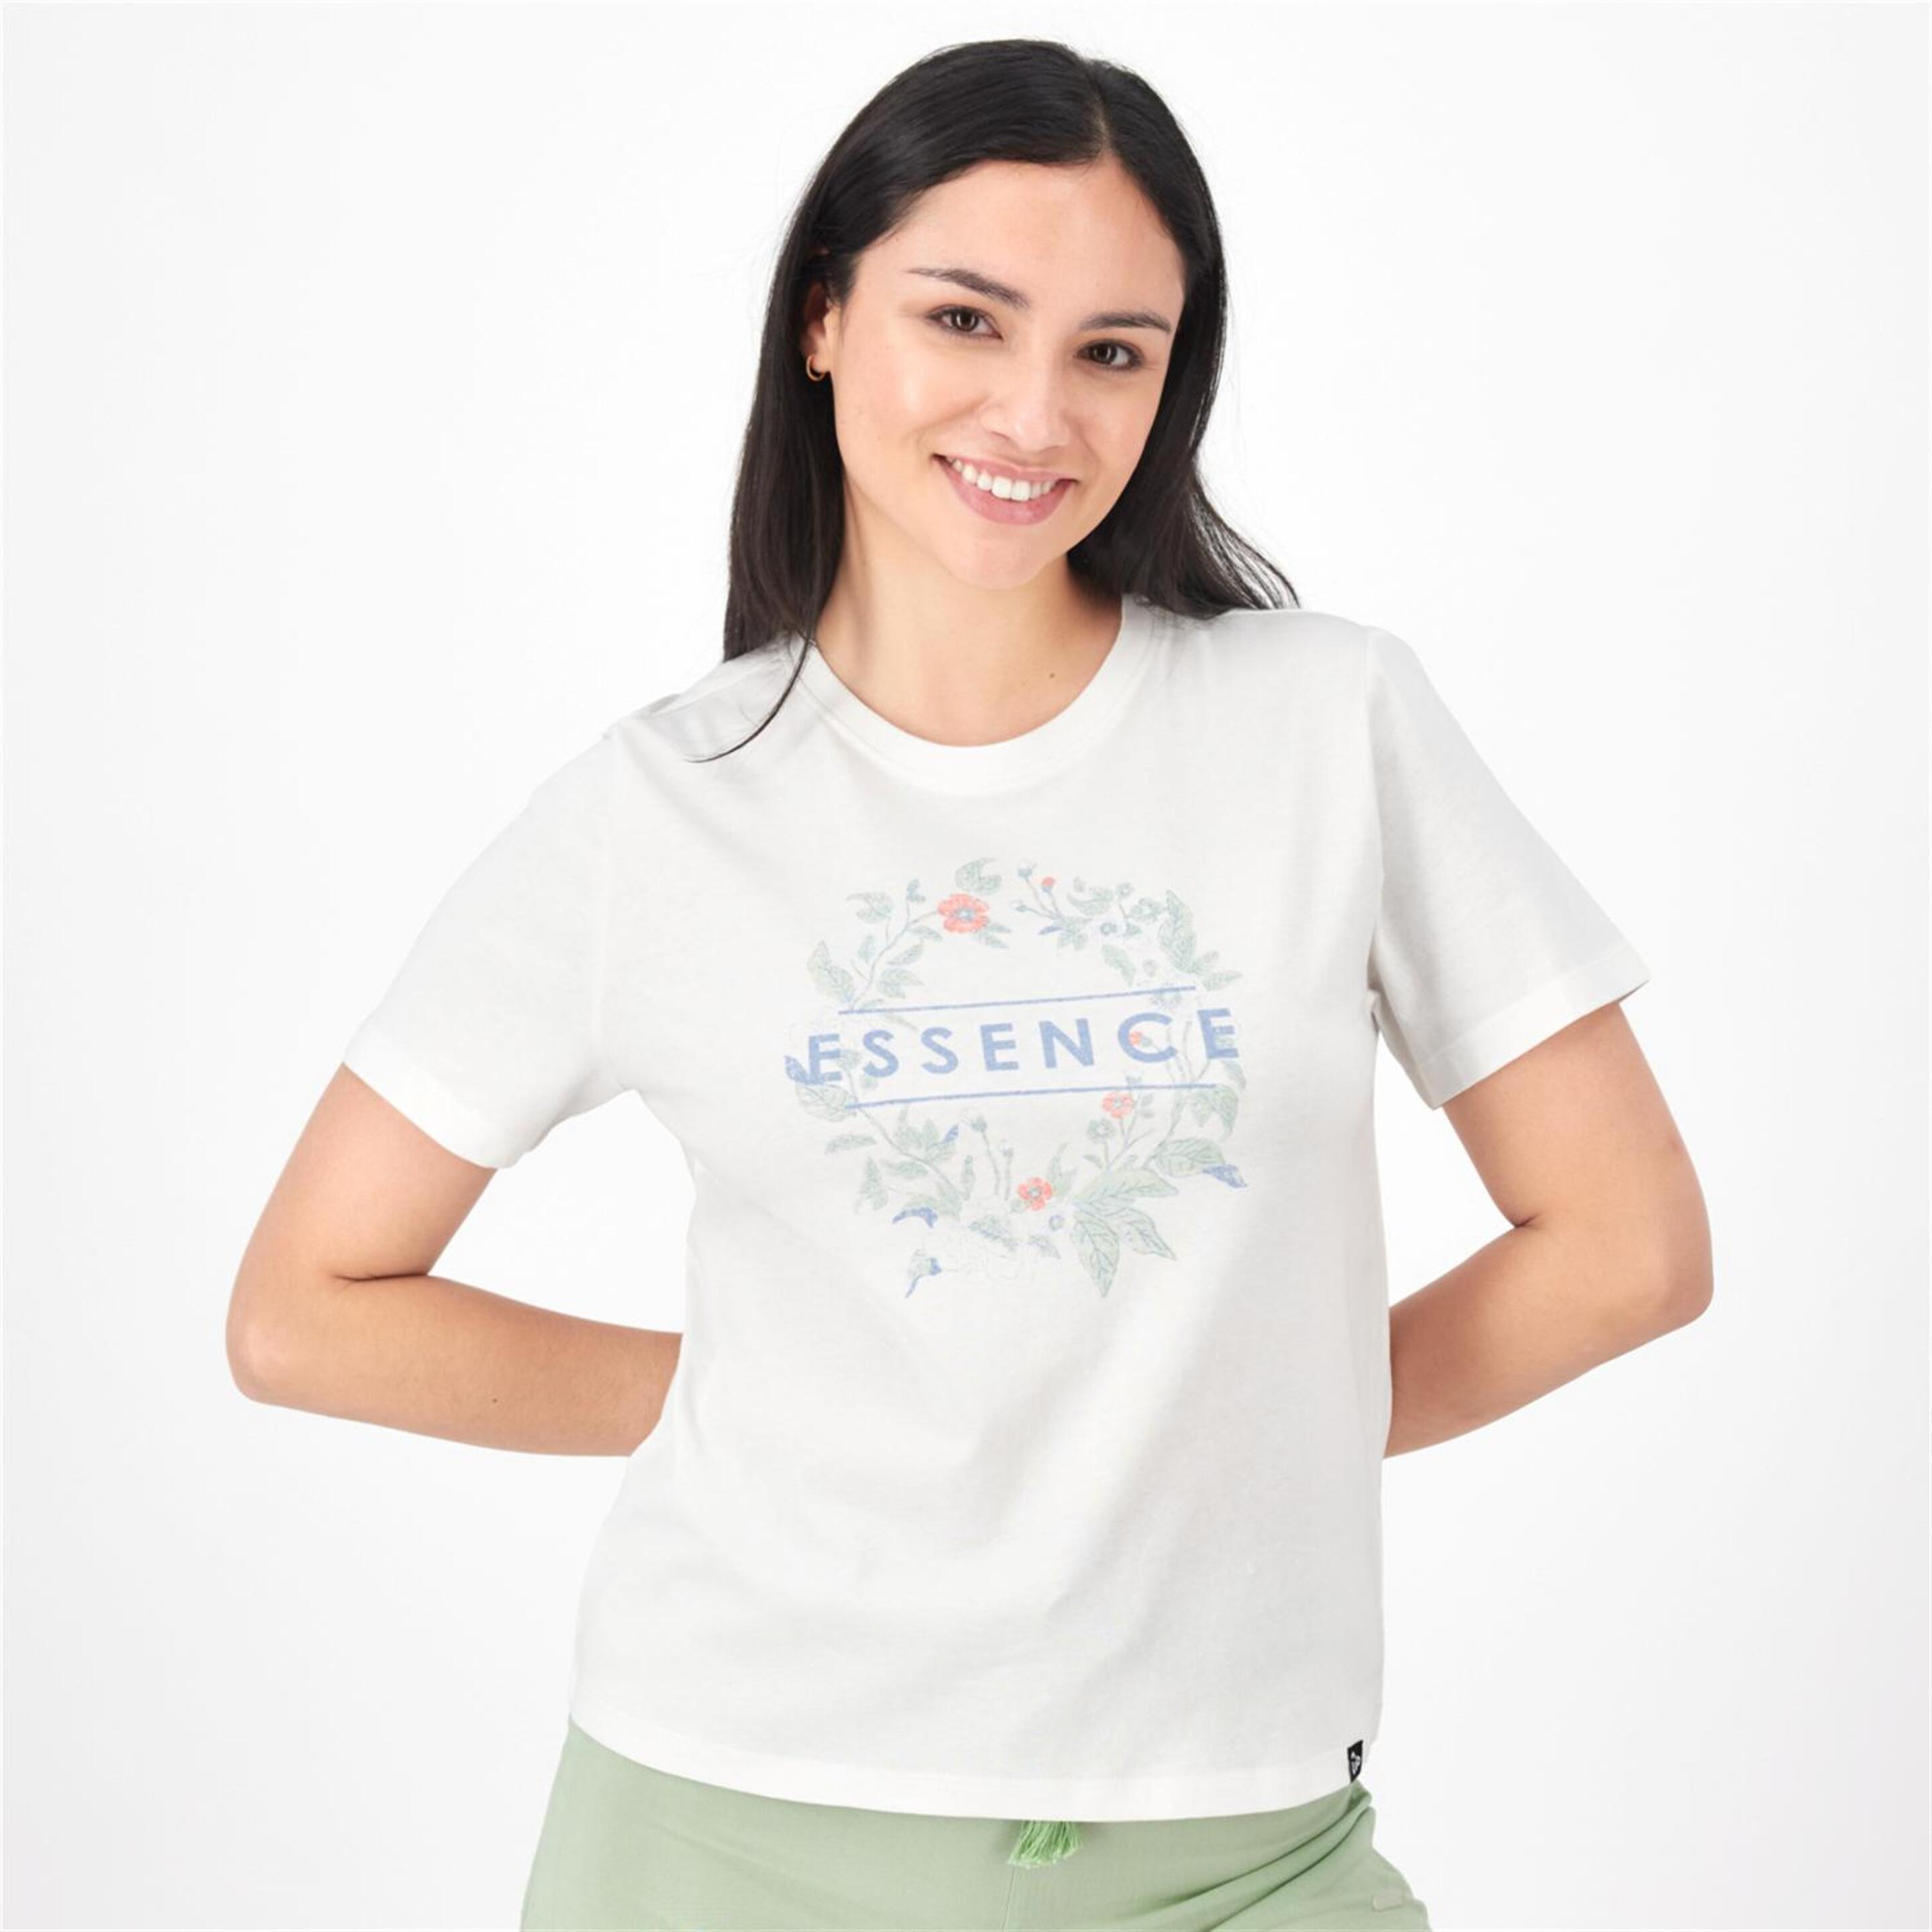 Up Stamps - blanco - T-shirt Mulher